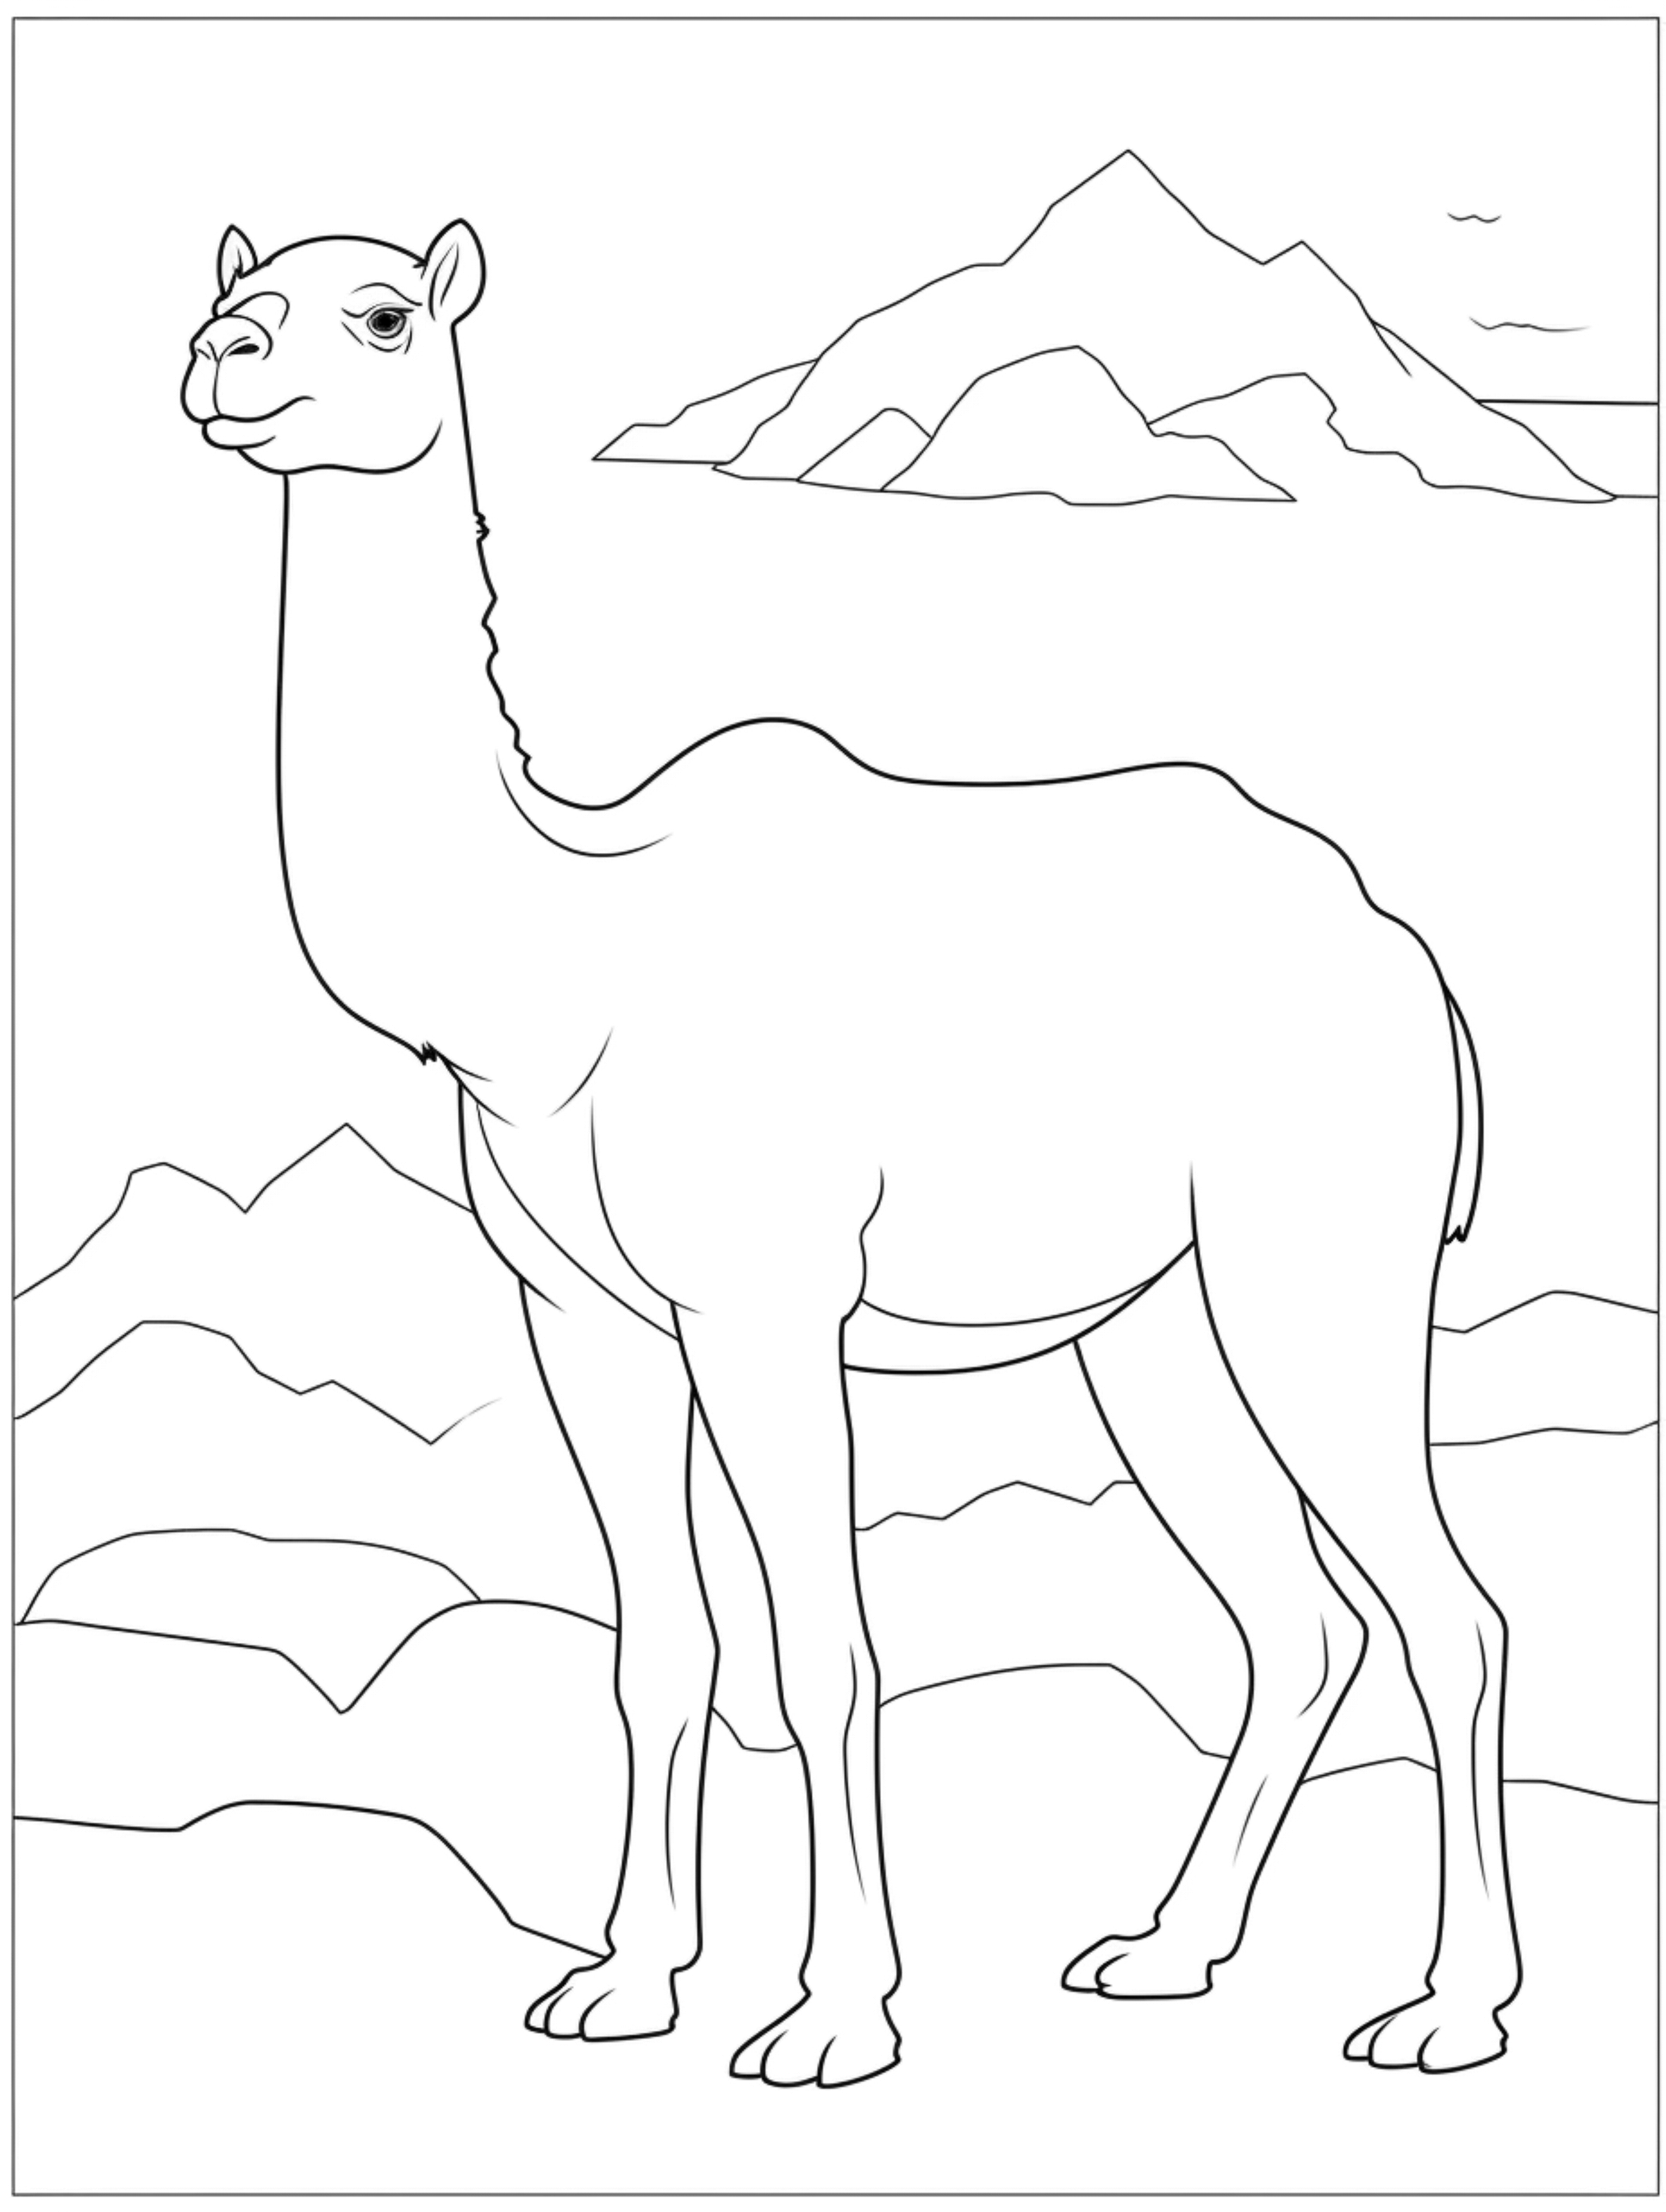 camel coloring page